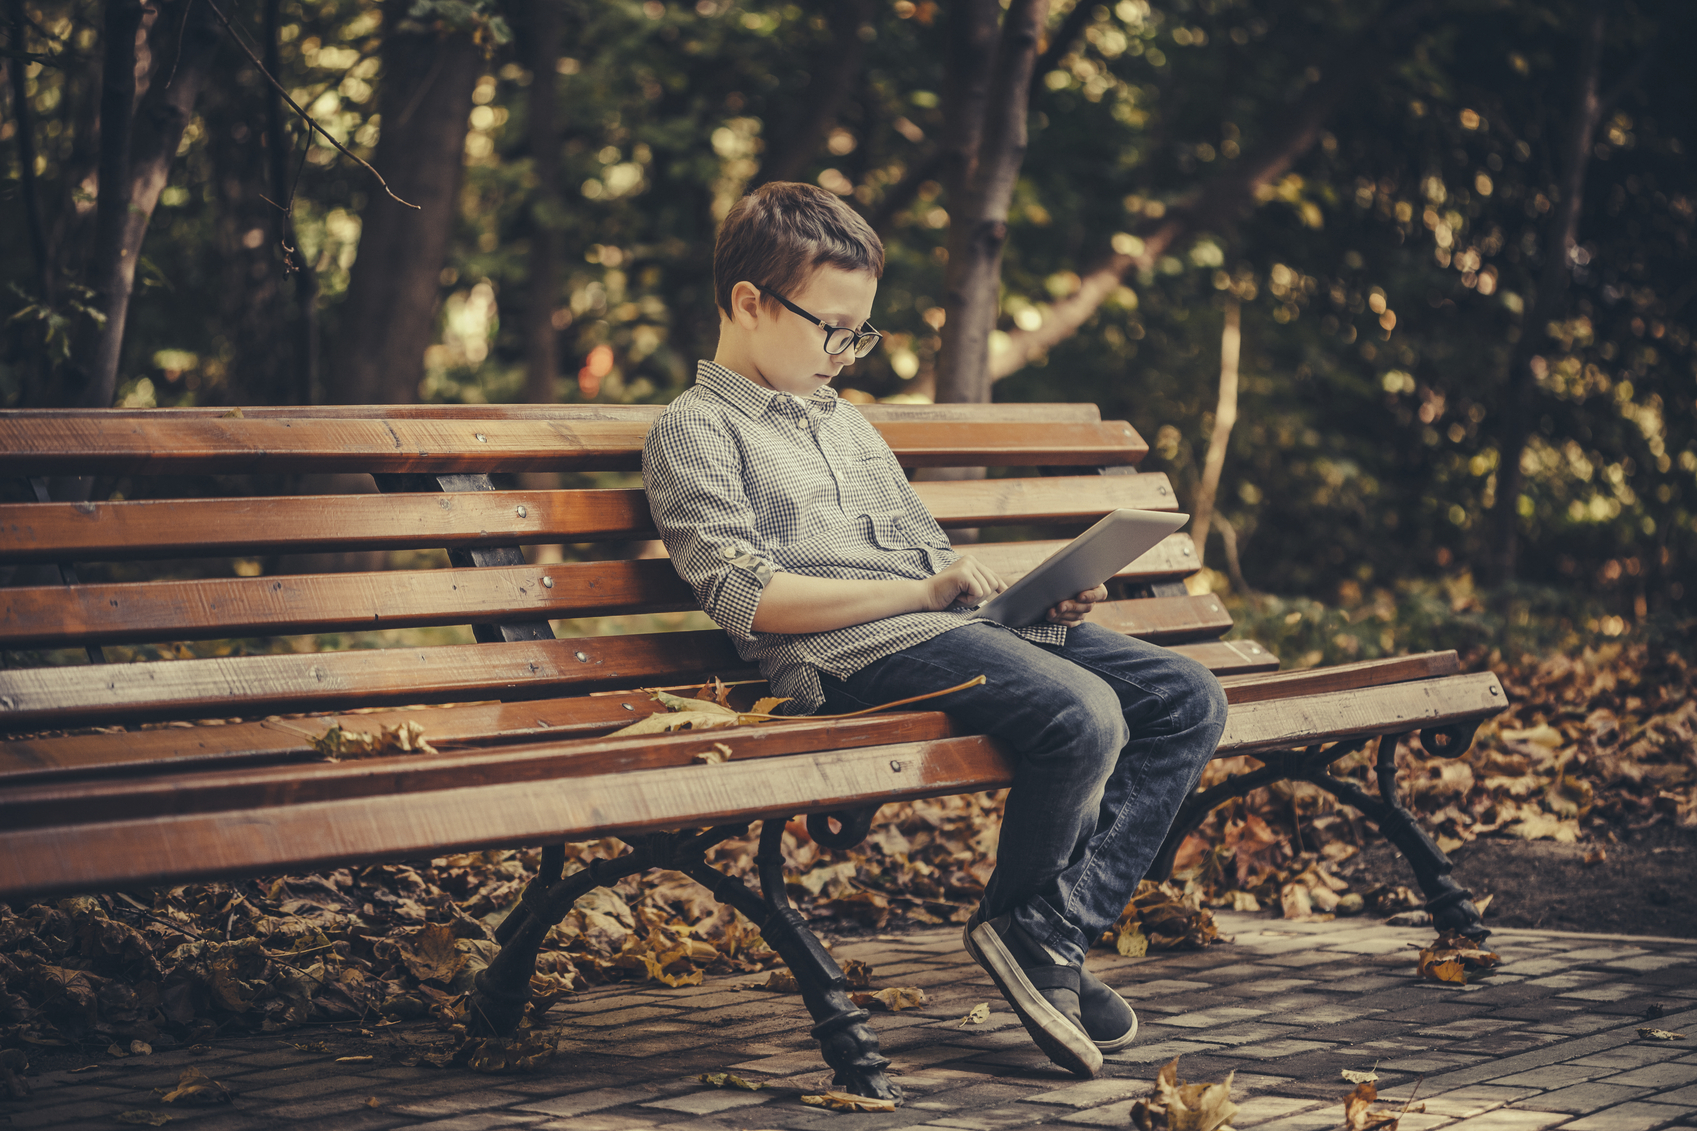 Cute boy using a digital tablet sitting in the park. Stock photo.